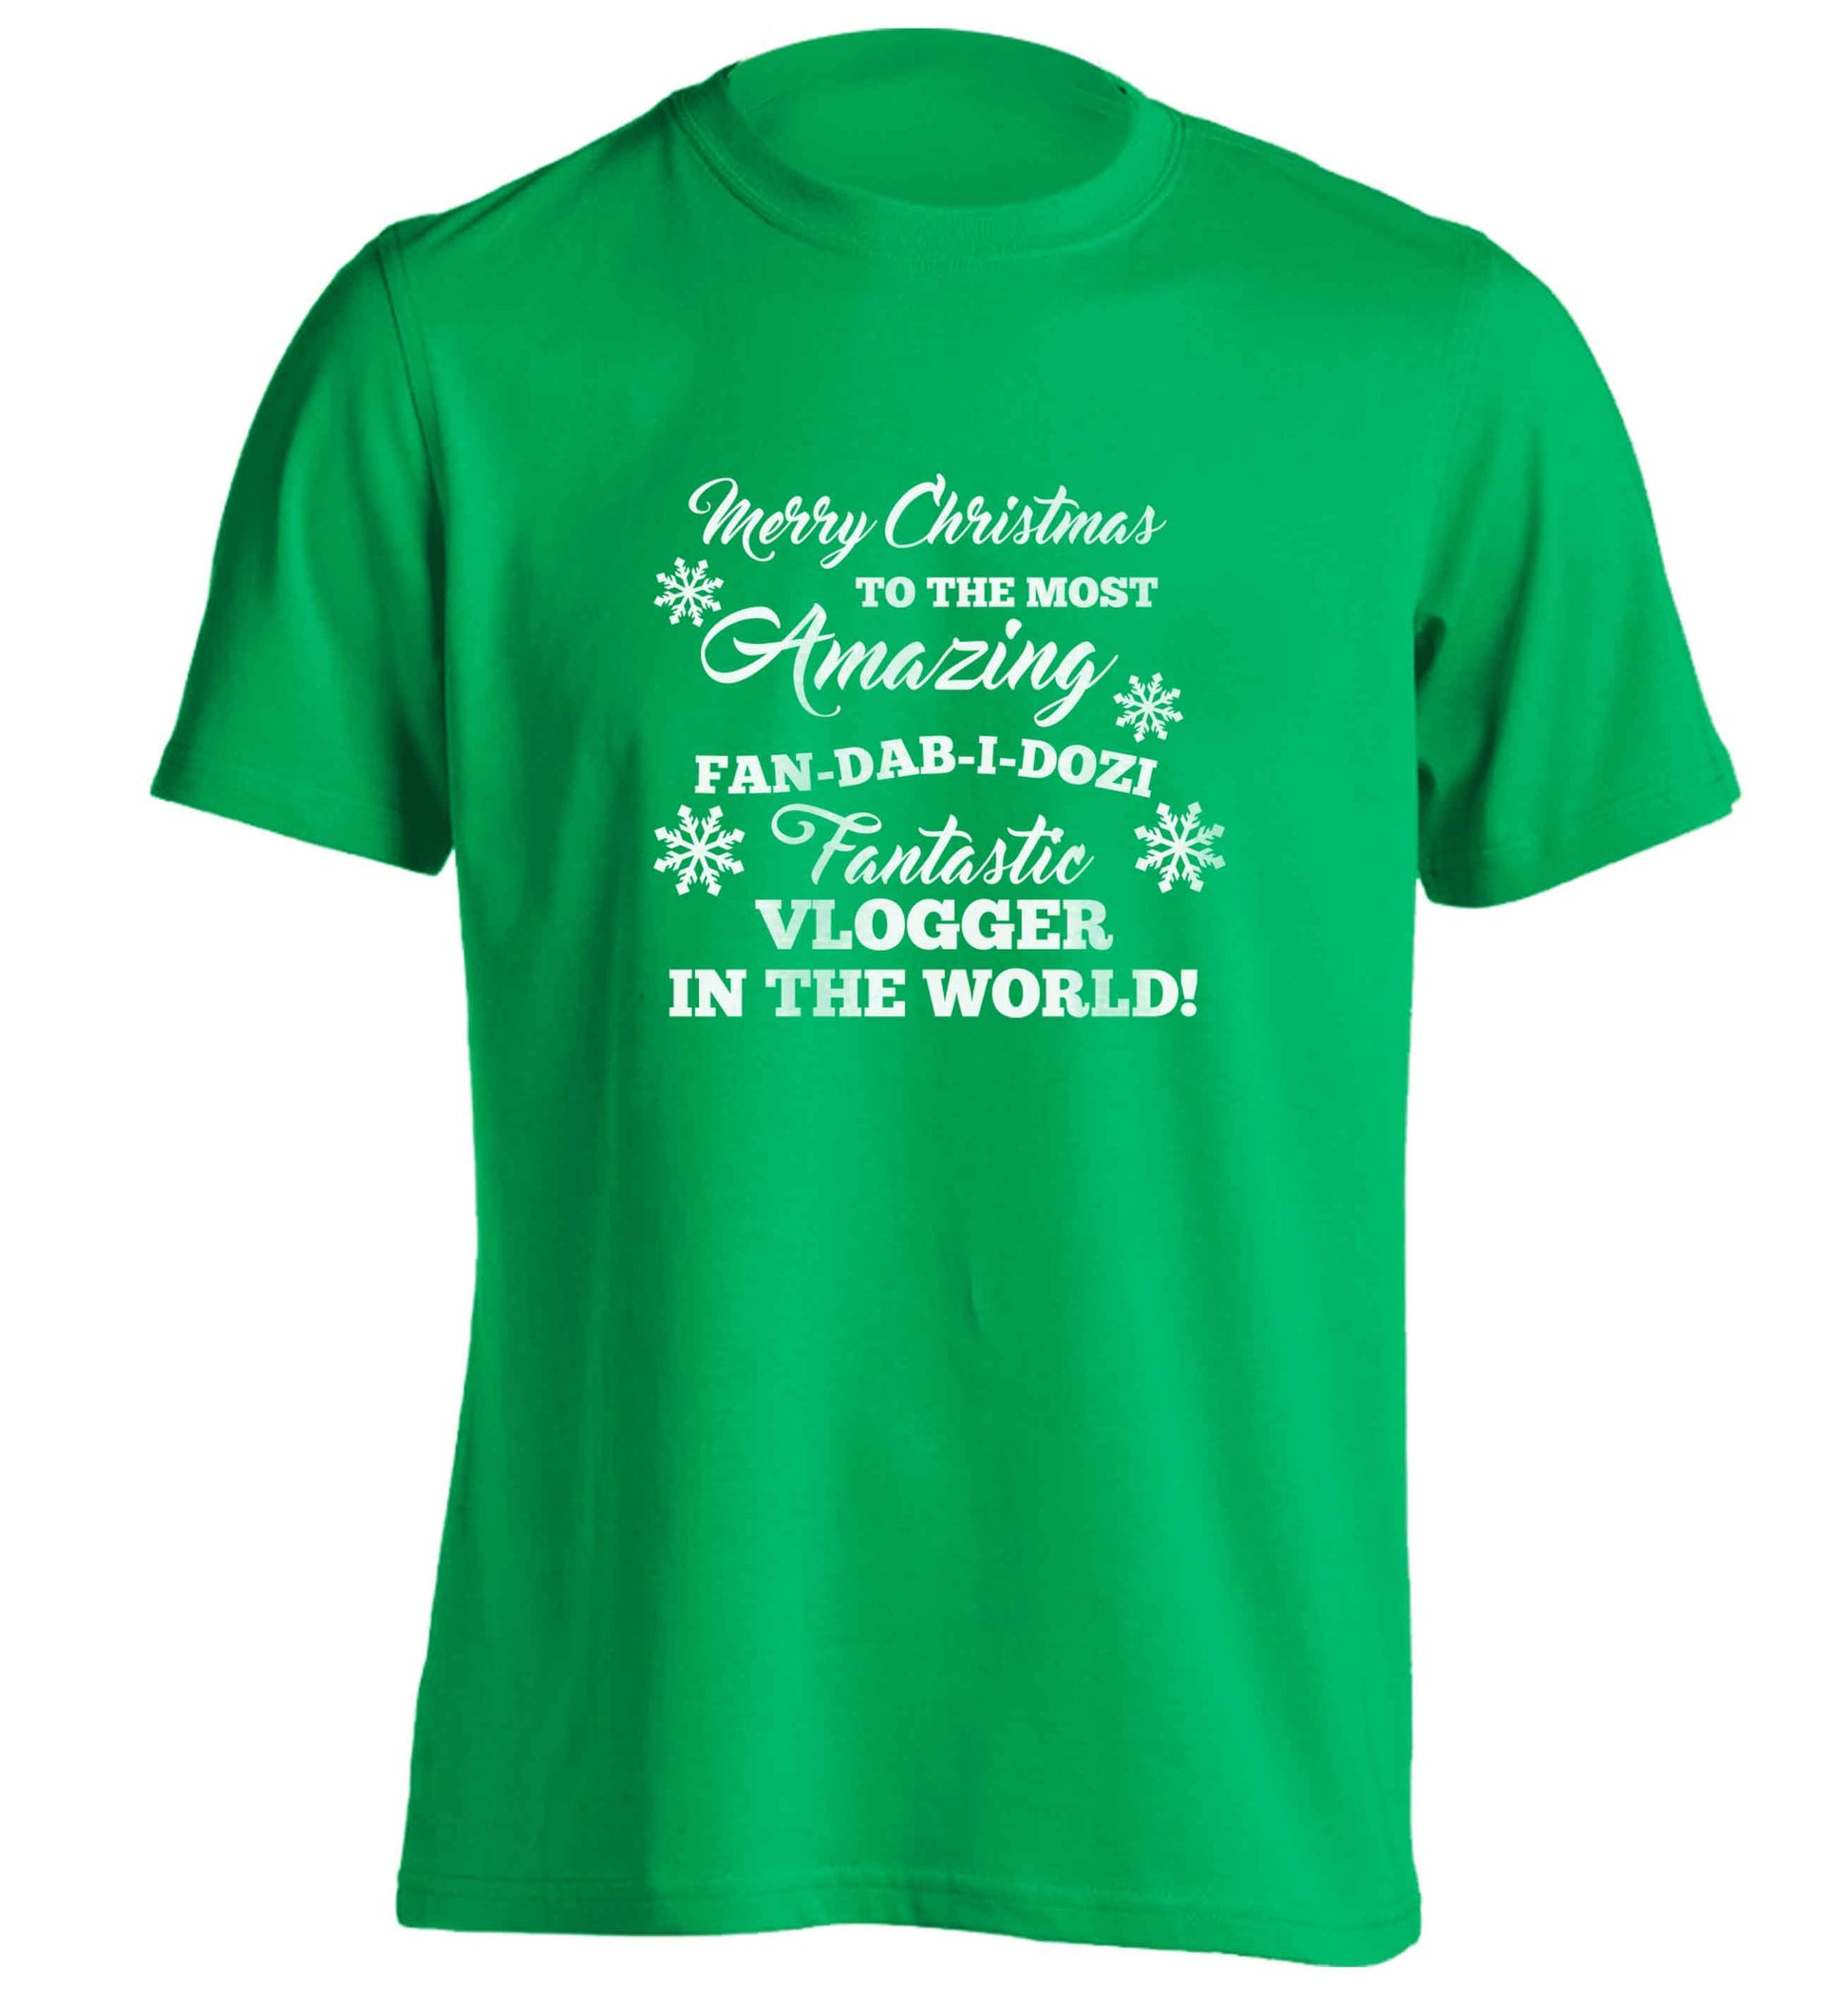 Merry Christmas to the most amazing fan-dab-i-dozi fantasic vlogger in the world adults unisex green Tshirt 2XL